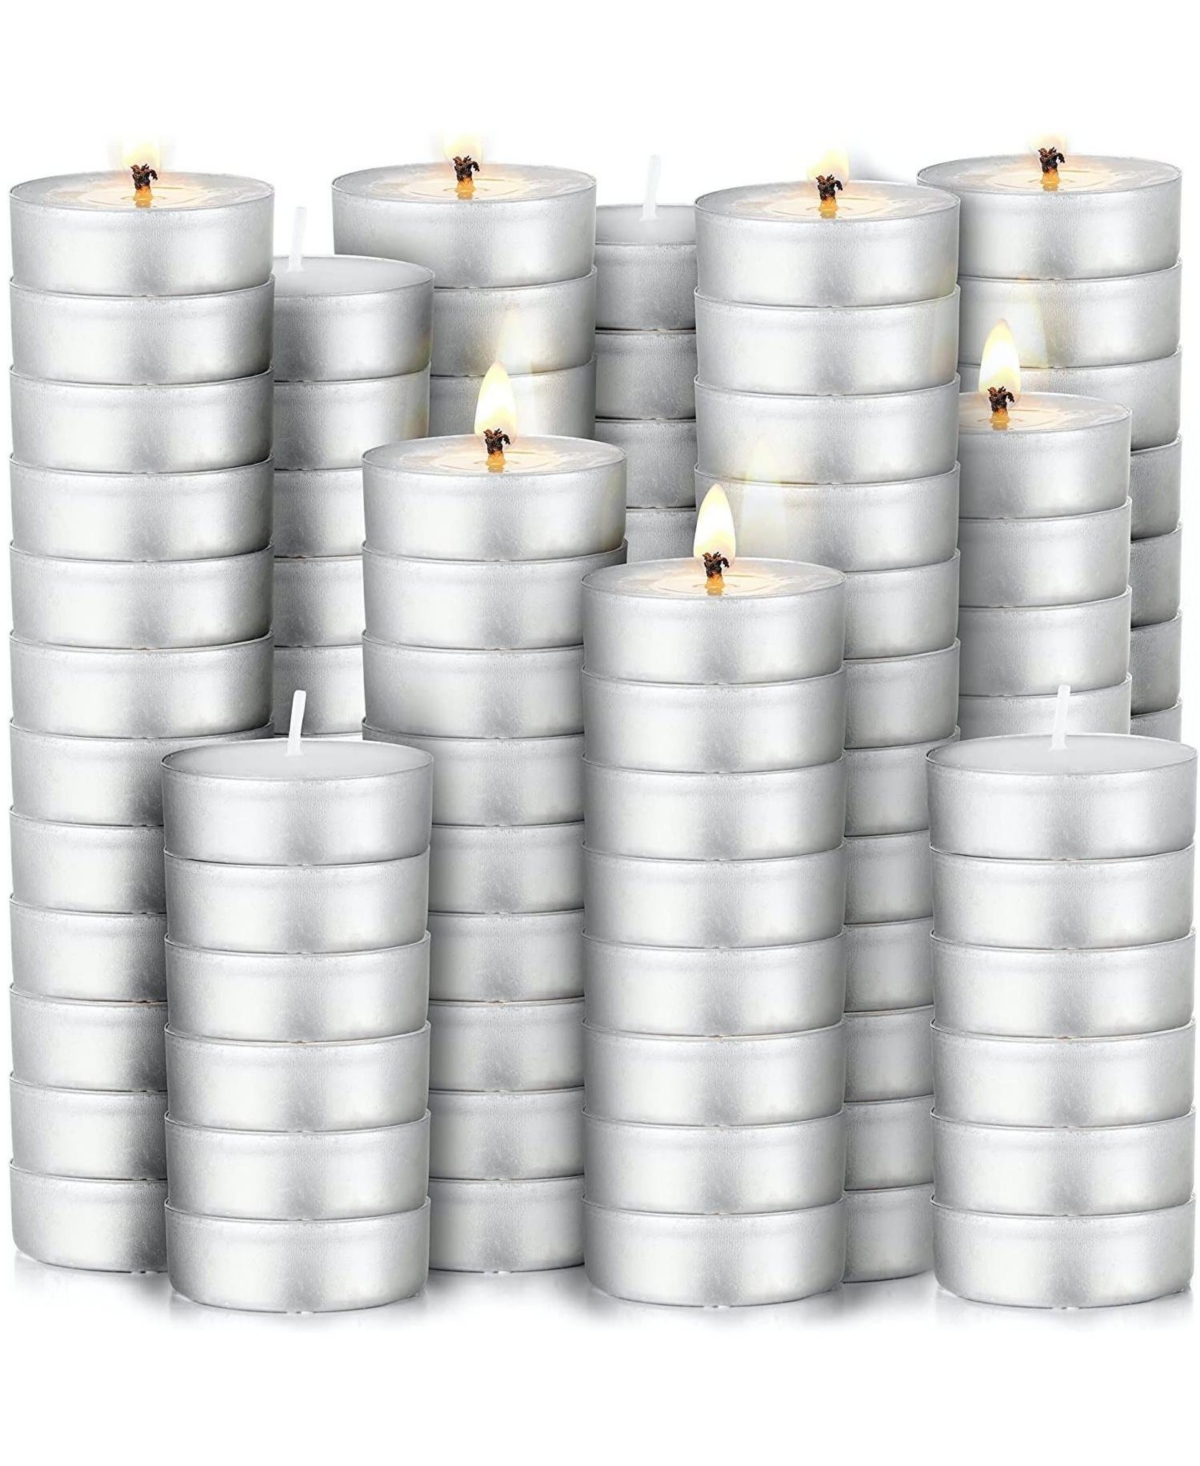 150 Pack Smokeless Unscented Long Burning Tea Lights Candles for Home - White